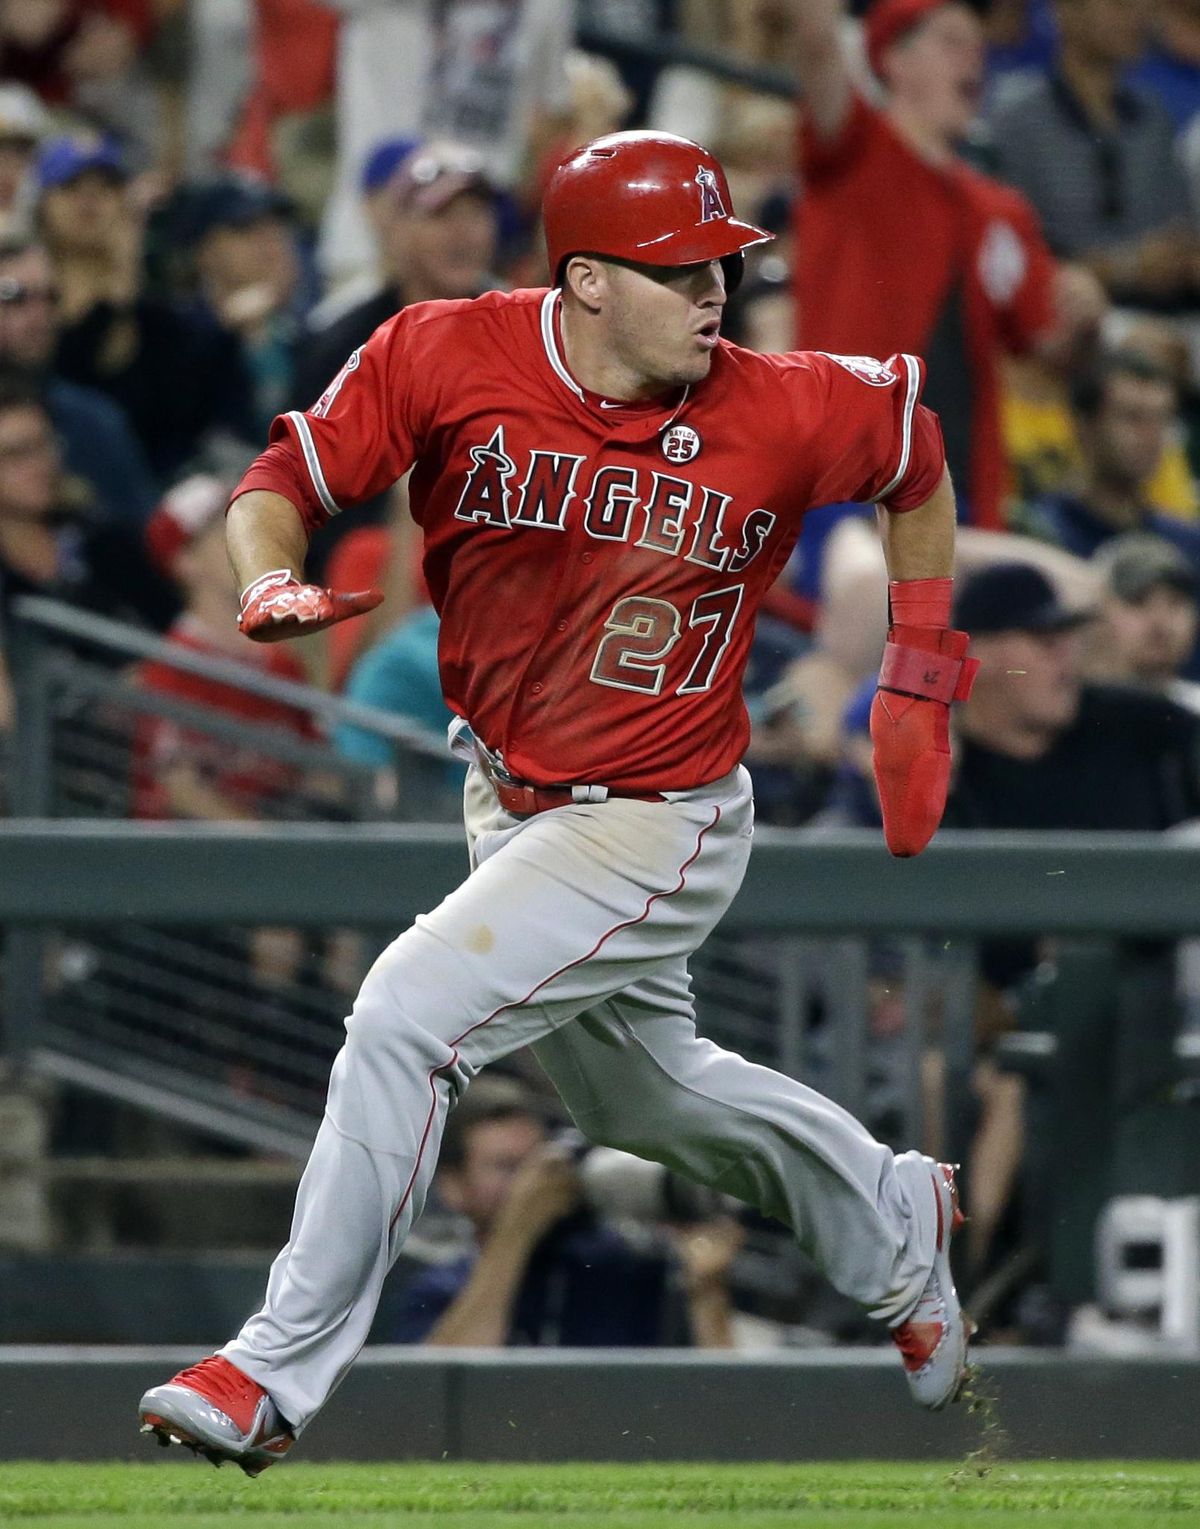 Los Angeles Angels’ Mike Trout heads home to score the go-ahead run on an error by Jean Segura of the Mariners during the ninth inning of a baseball game Friday, Aug. 11, 2017, in Seattle. (Elaine Thompson / Associated Press)